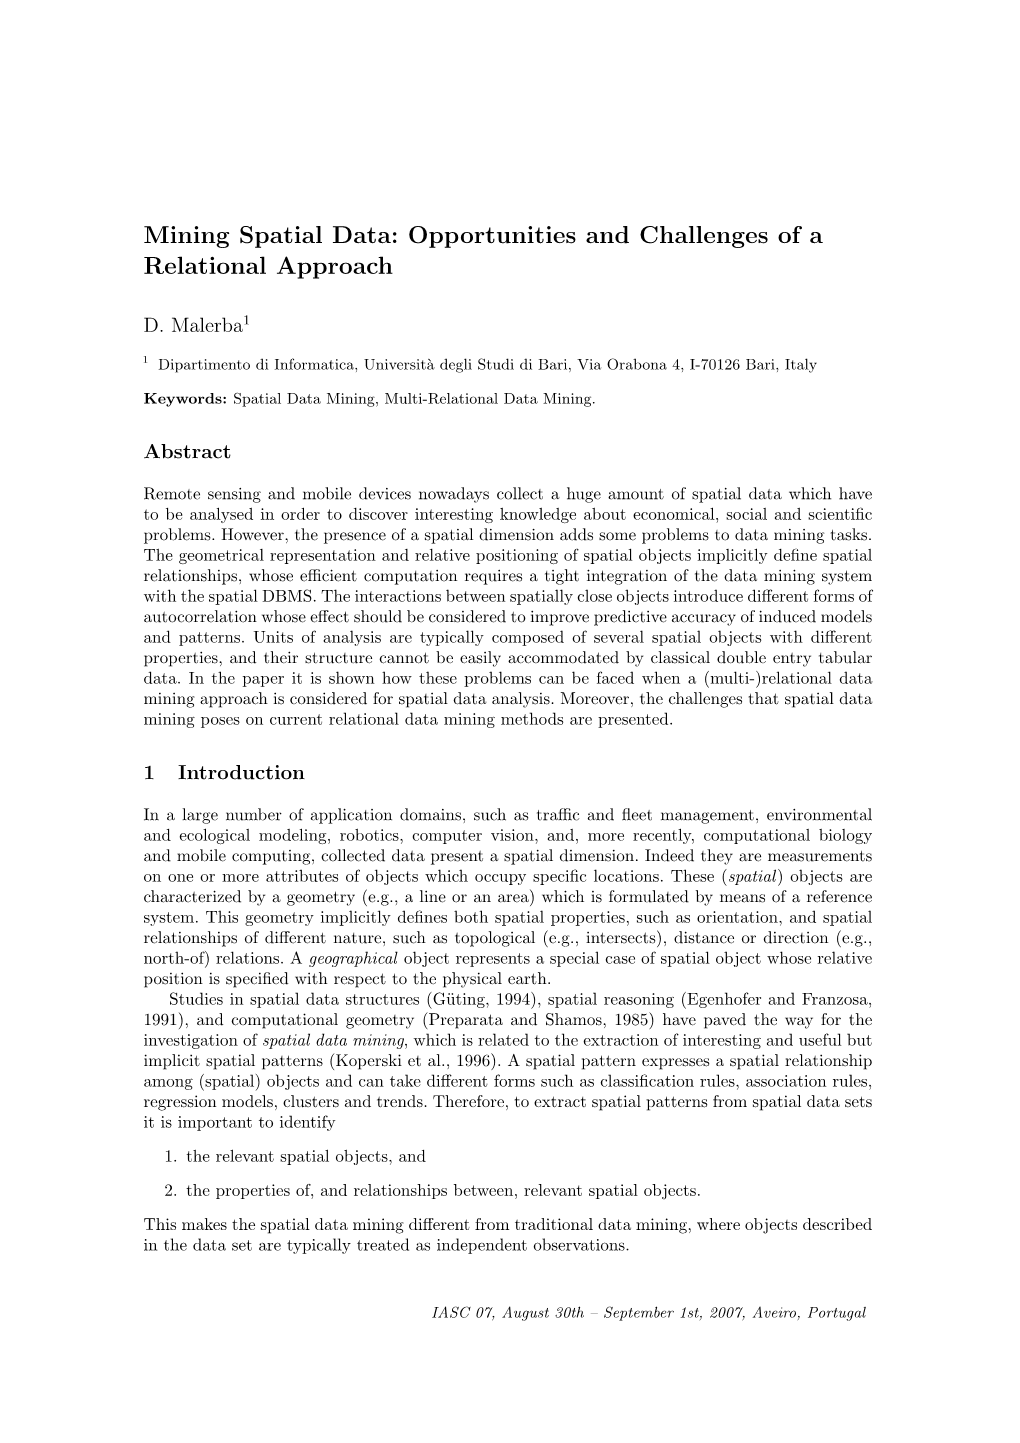 Mining Spatial Data: Opportunities and Challenges of a Relational Approach